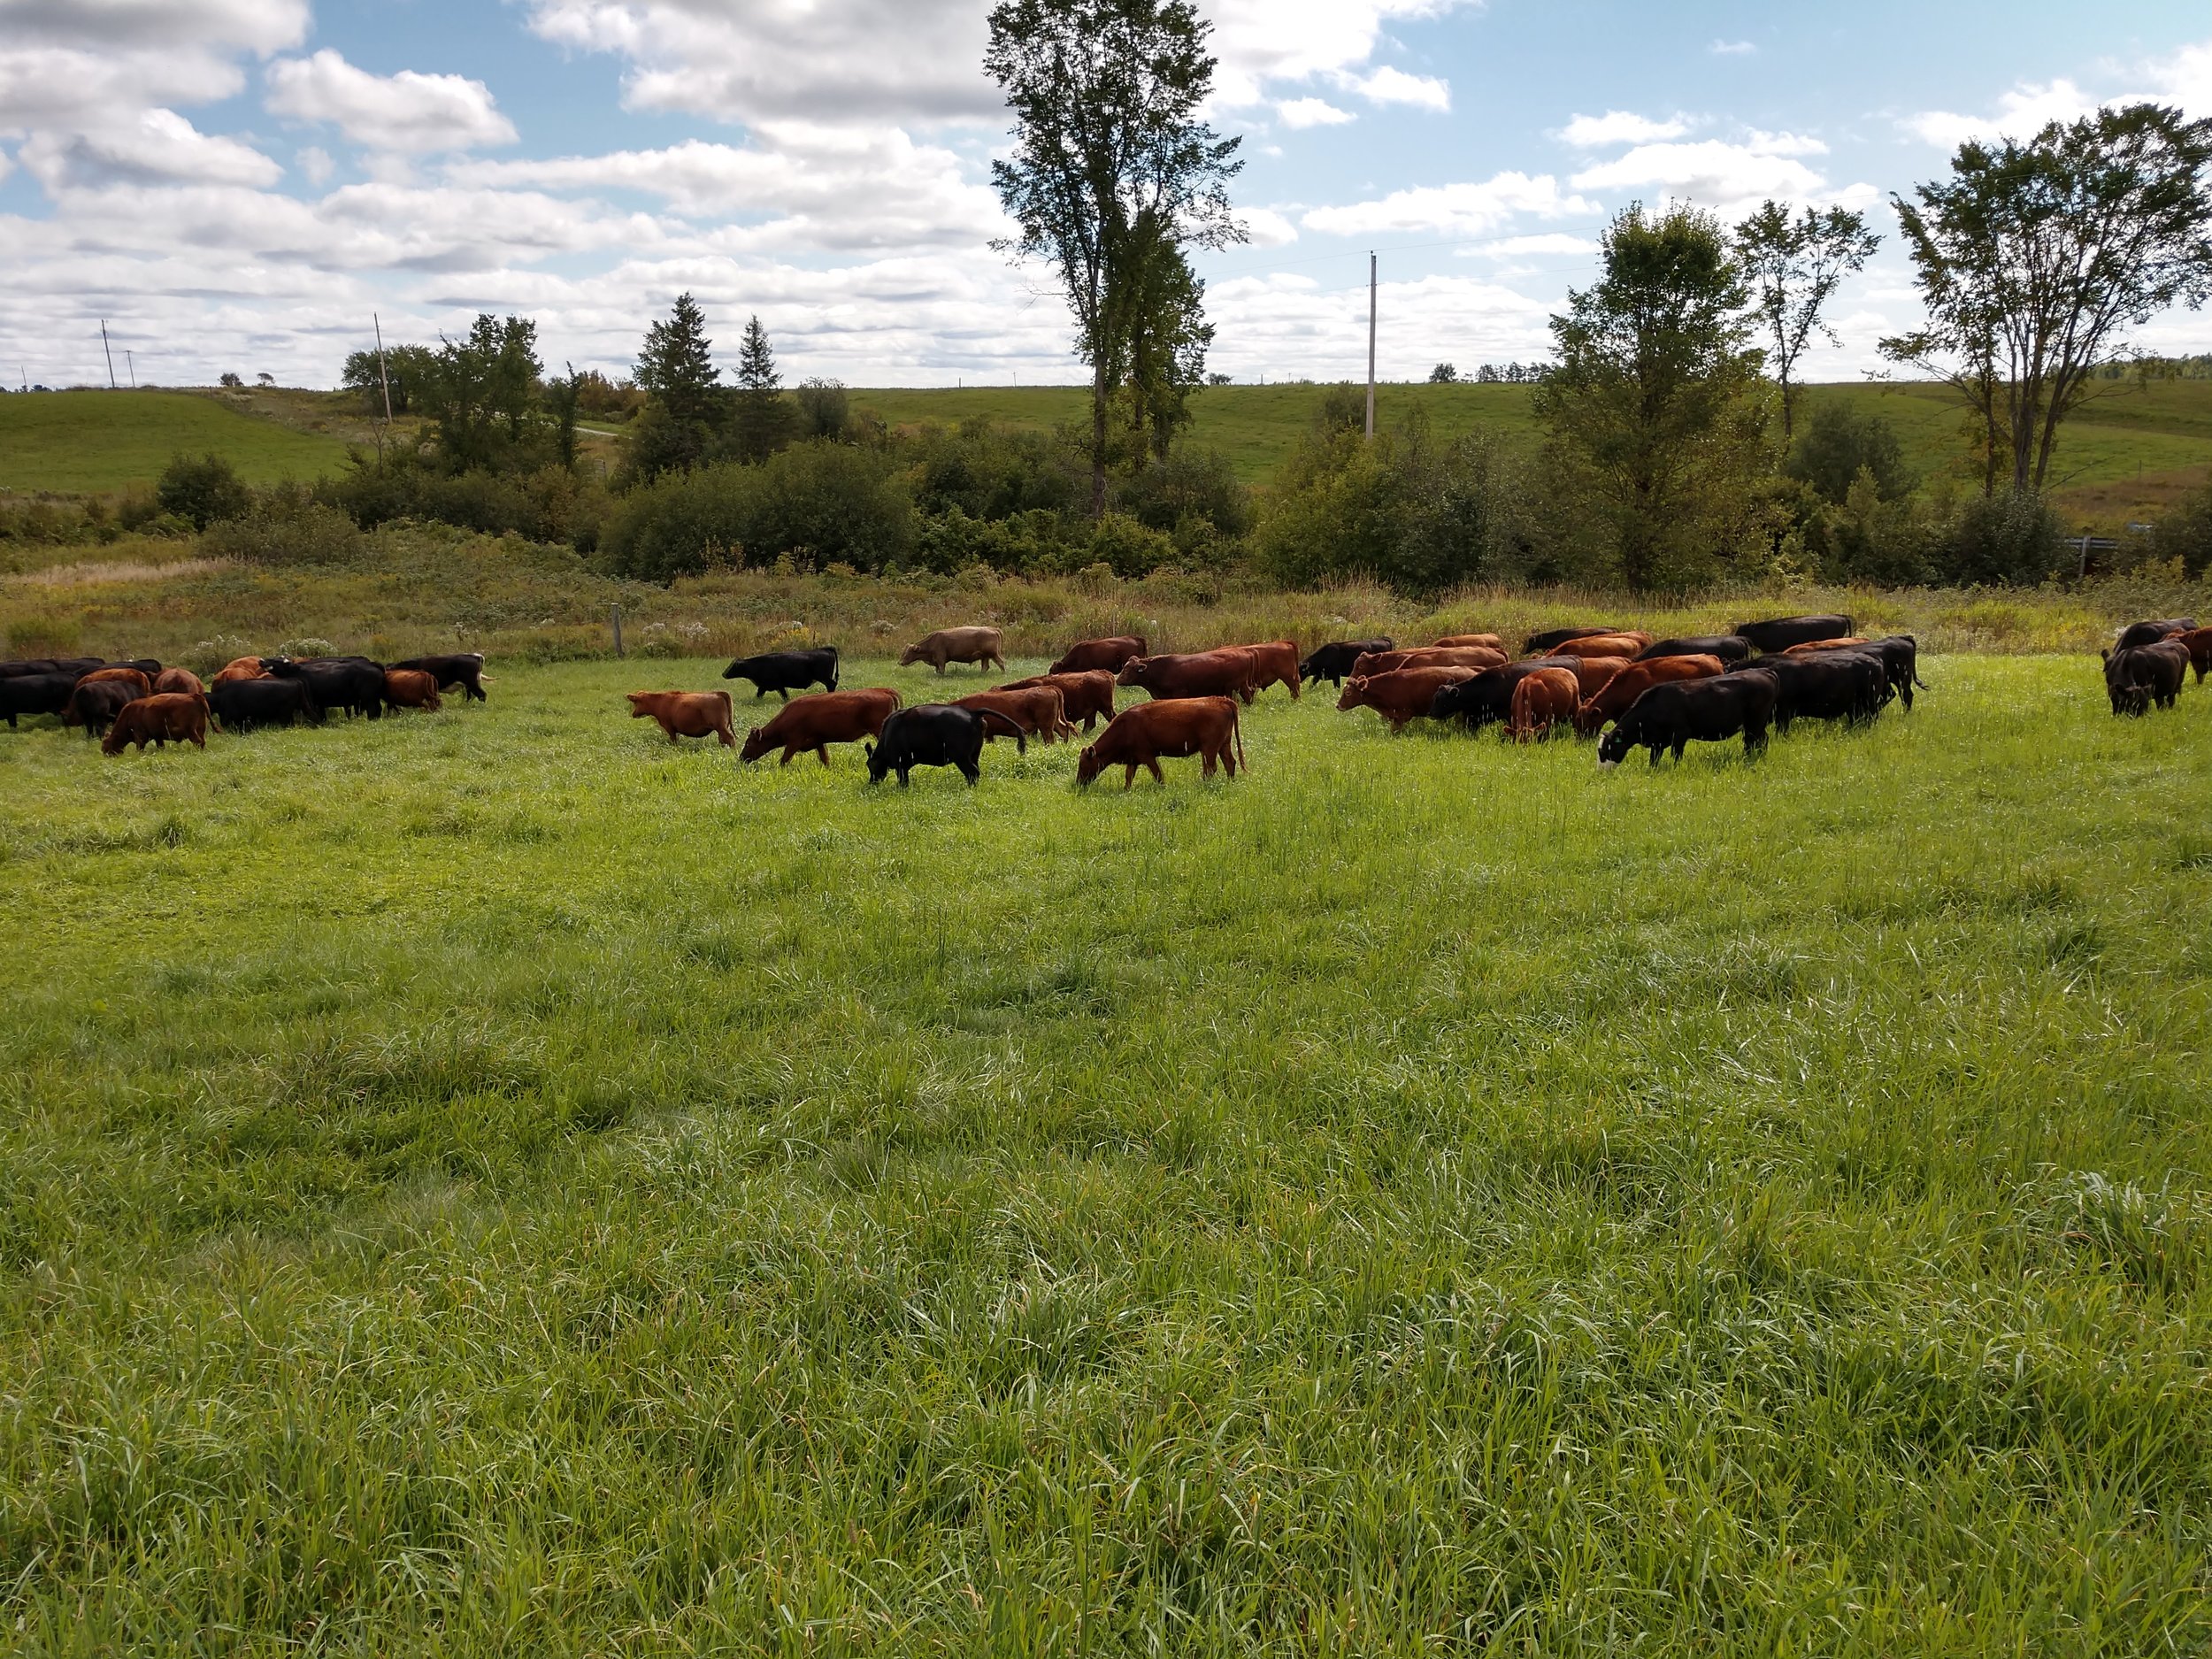 cover photo - cattle grazing with blue sky in distance.jpg